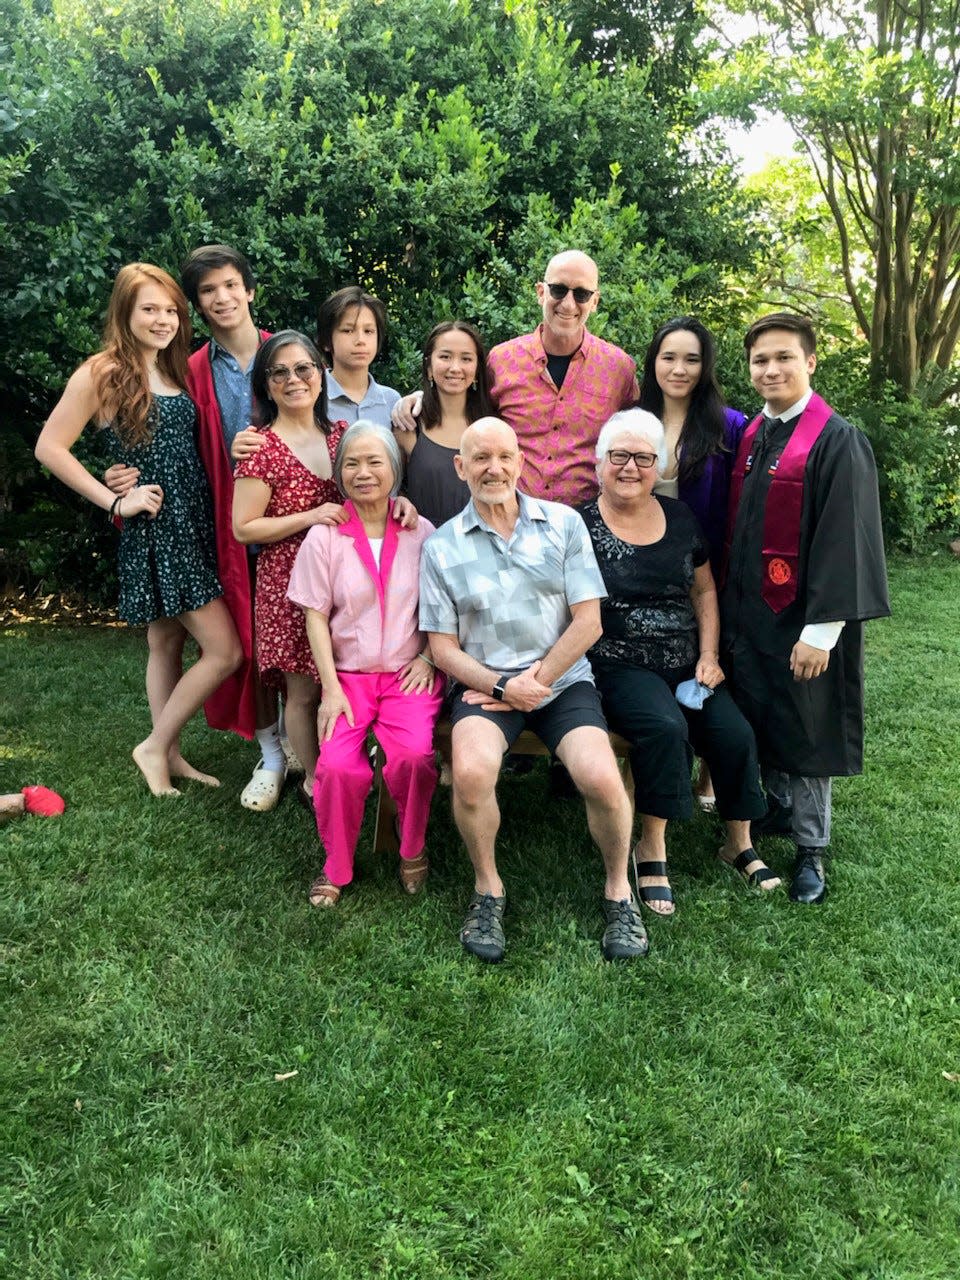 After quarantines and juggling medical recommendations to move college kids back into the family bubble in Northern Virginia in June 2020: In the front row are grandparents Duc Le and Bob and Carol Anne Elston. Back row from left, Fiorella Chrystal, high school grad Kien-Tam, Thuan, son Thai-Son, daughter Thai-Binh, husband Bob, son Hanh-Thien and girlfriend Suzi Kawachi — both new college graduates.